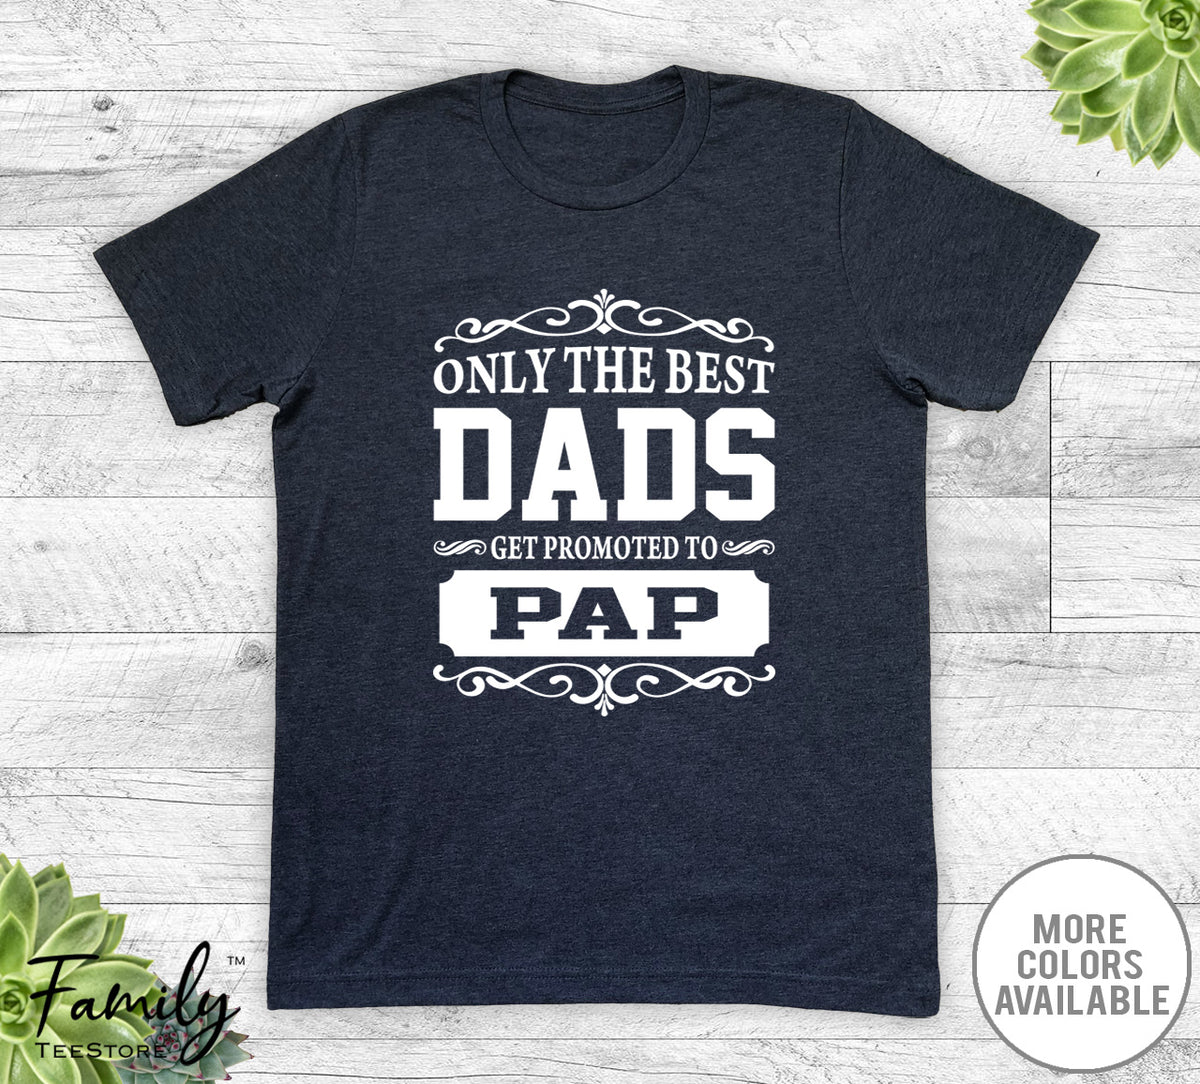 Only The Best Dads Get Promoted To Pap Pap - Unisex T-shirt - Pap Pap Shirt - Pap Pap Gift